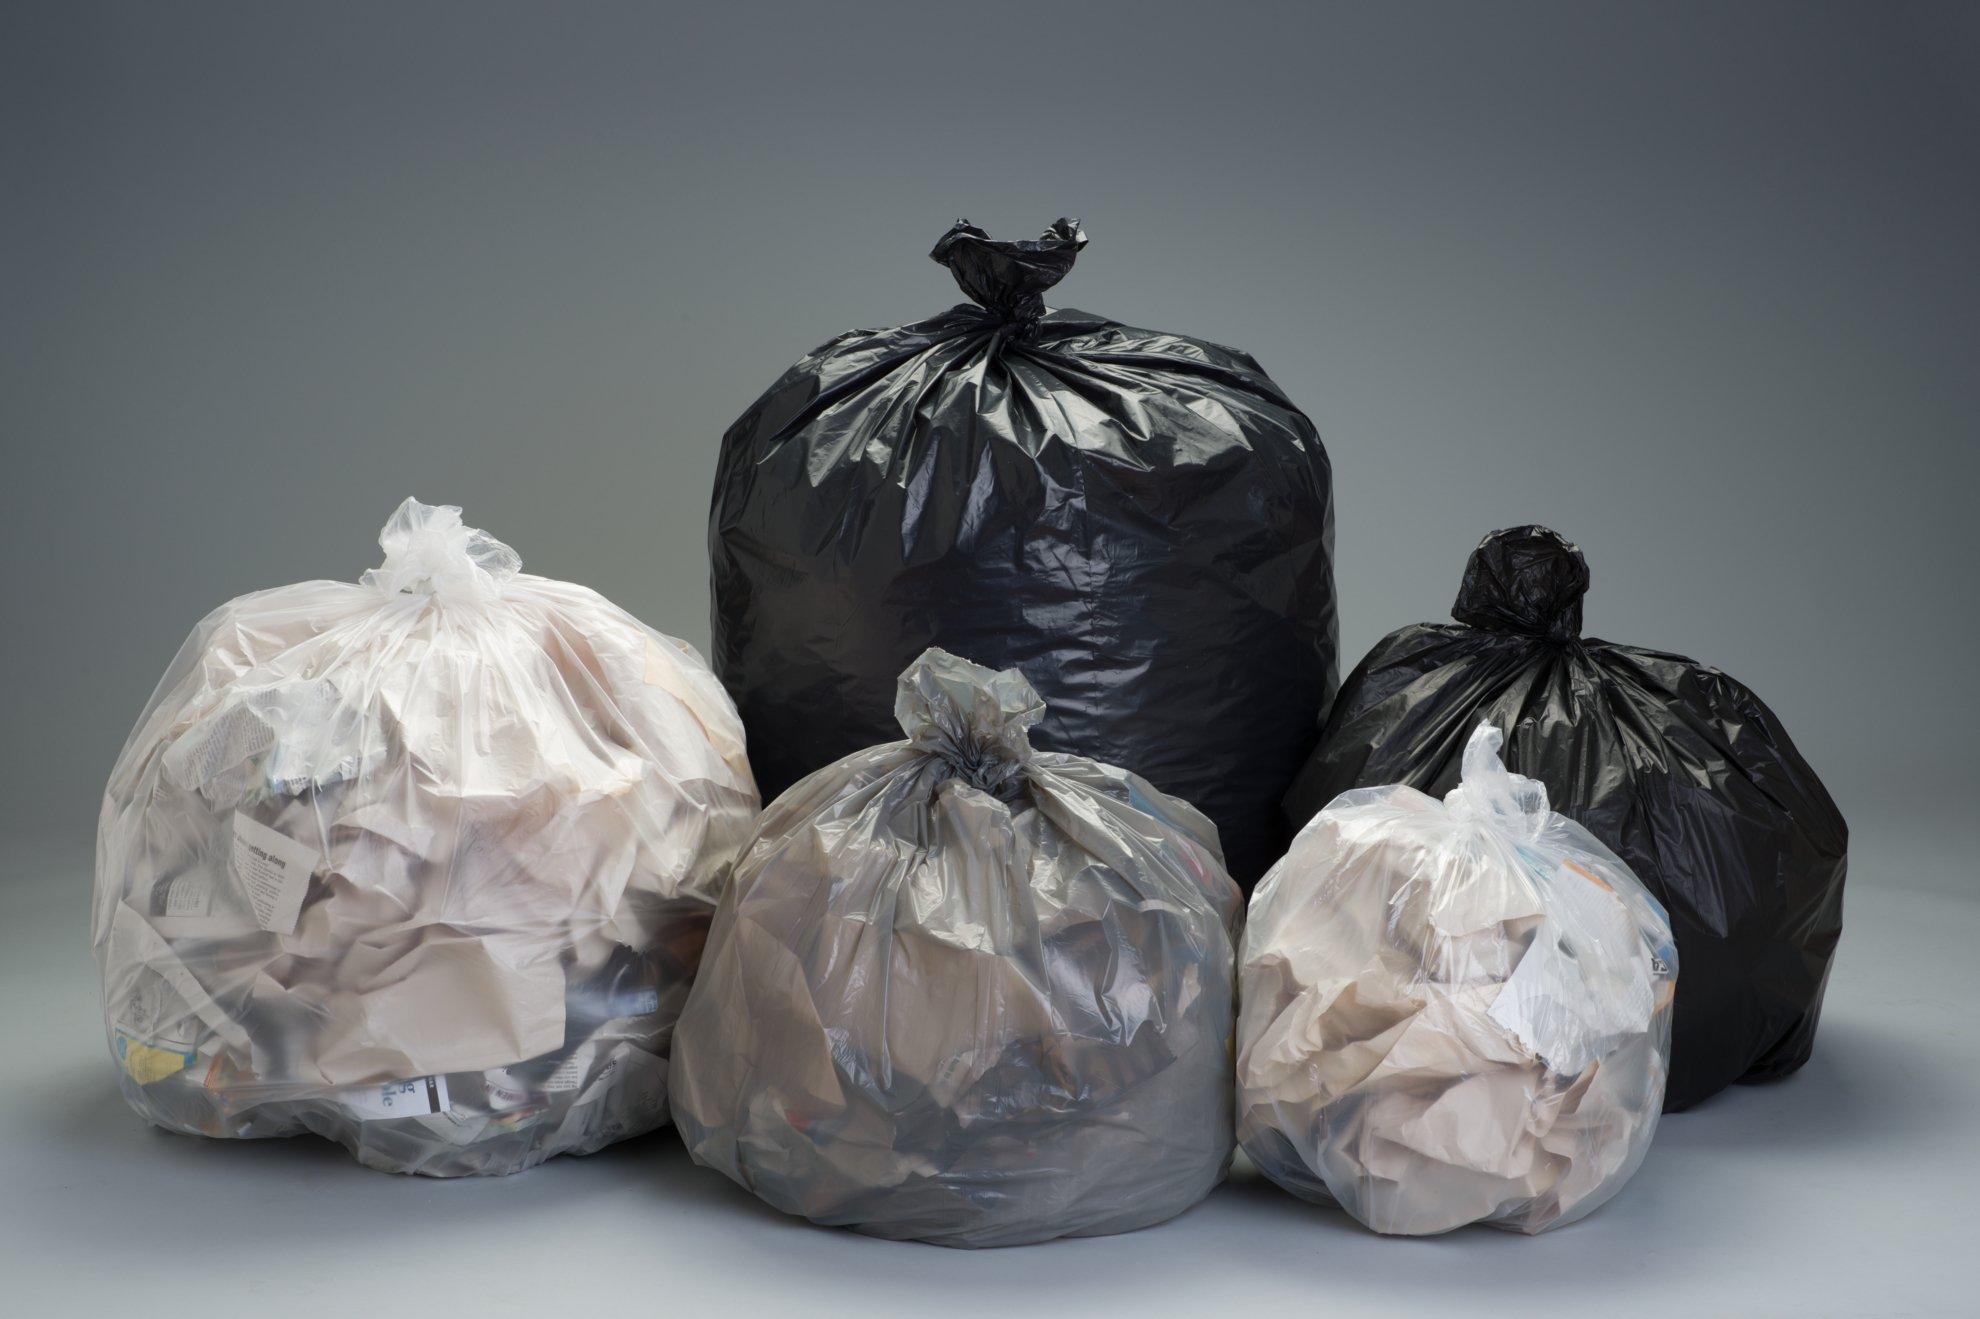 Five different-colored trash bags full of paper waste are gathered against a gray background.